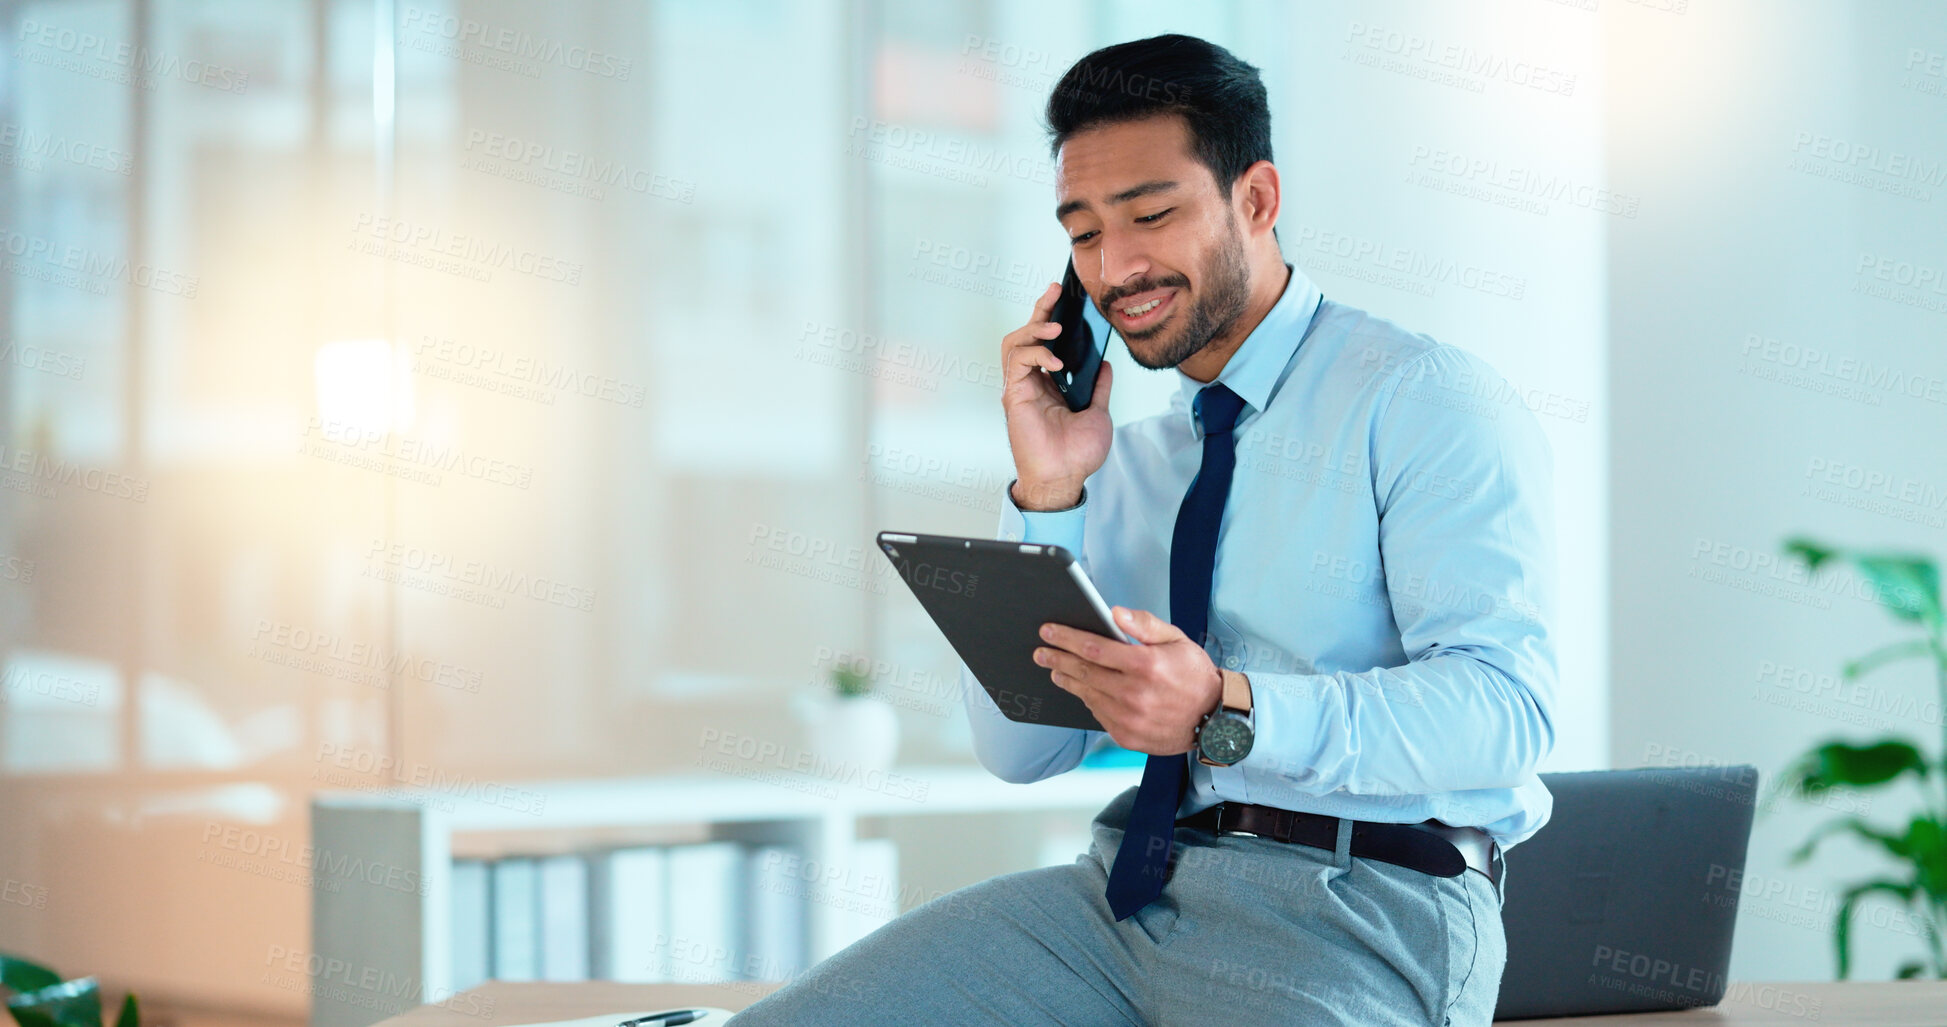 Buy stock photo Business man talking on a phone while browsing on a digital tablet in an office. Dedicated sales executive and young expert communicating project plans and discussing deals with clients in a company